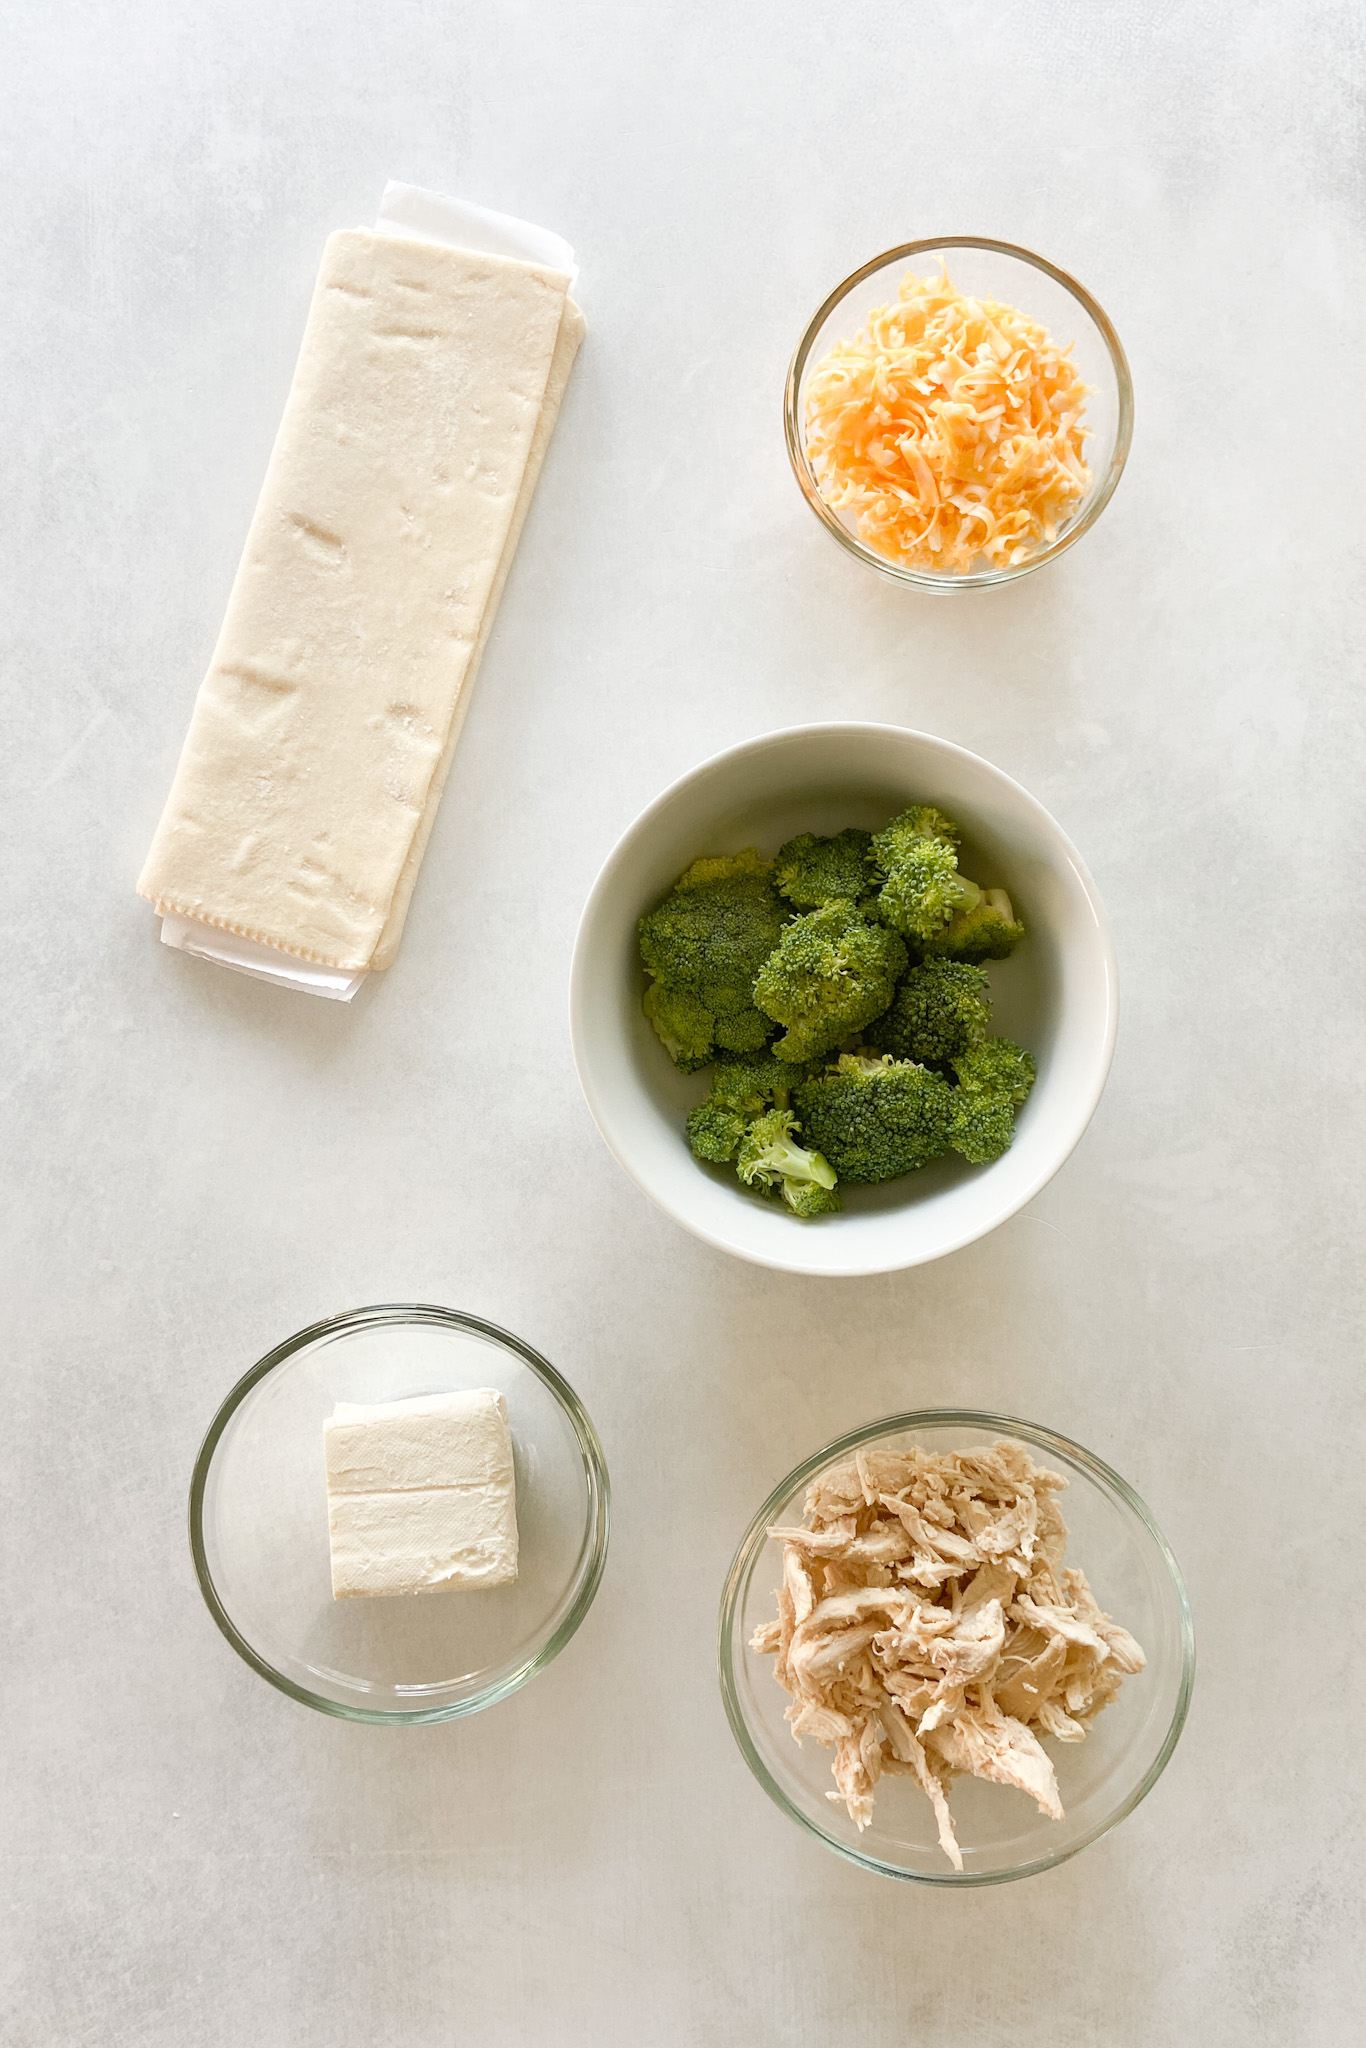 Ingredients to make broccoli and cheese pinwheels.